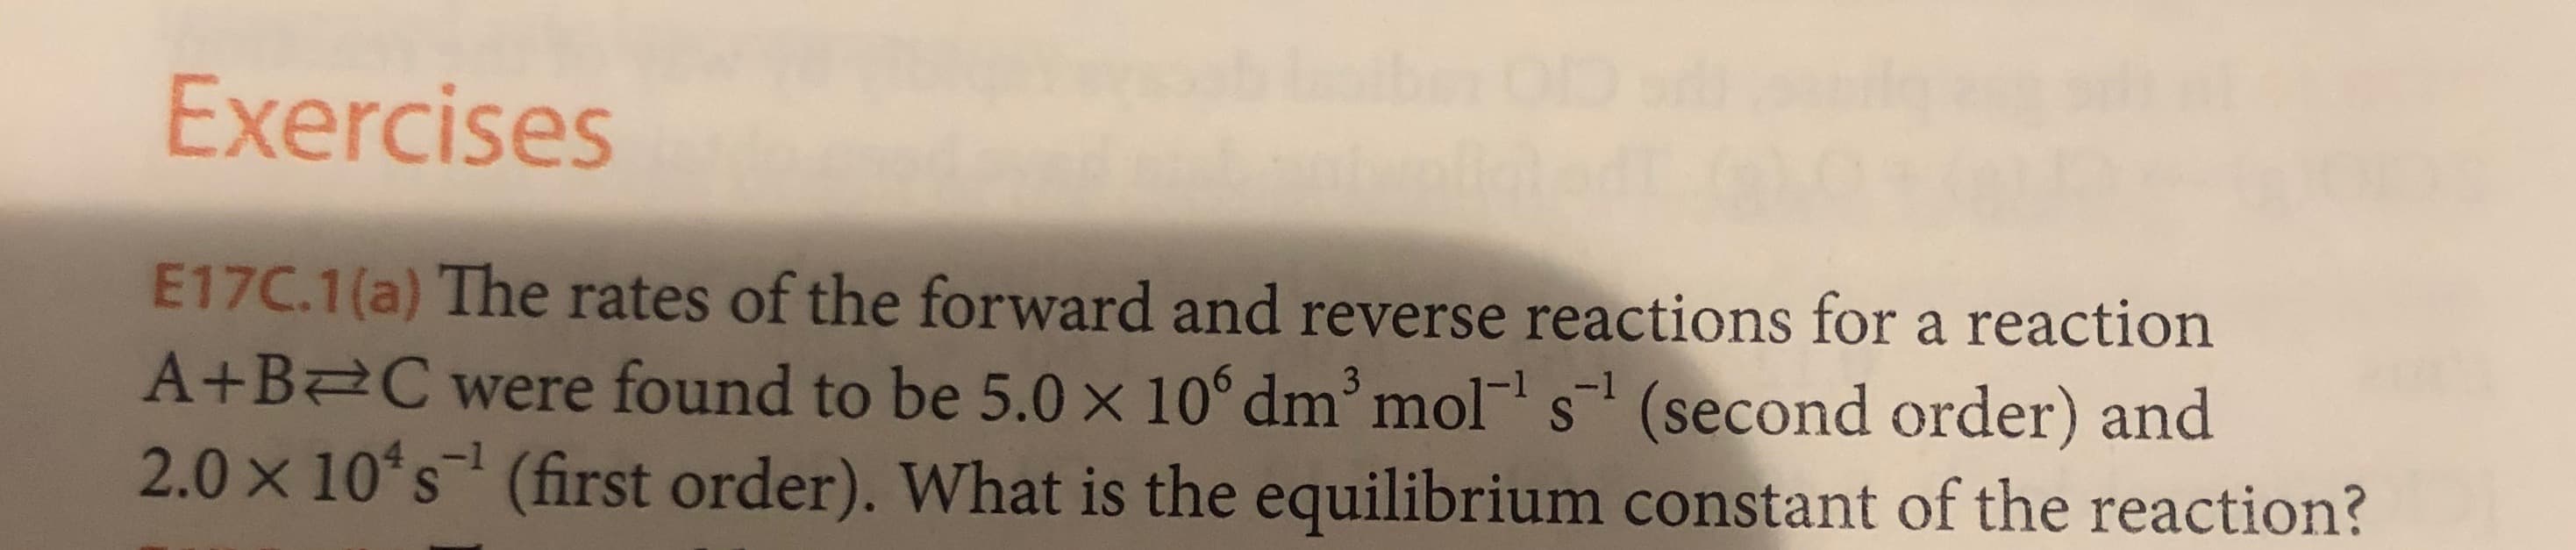 Exercises
E17C.1(a) The rates of the forward and reverse reactions for a reaction
A+B C were found to be 5.0 x 10° dm mol s (second order) and
2.0 x 10 s (first order). What is the equilibrium constant of the reaction?
3
